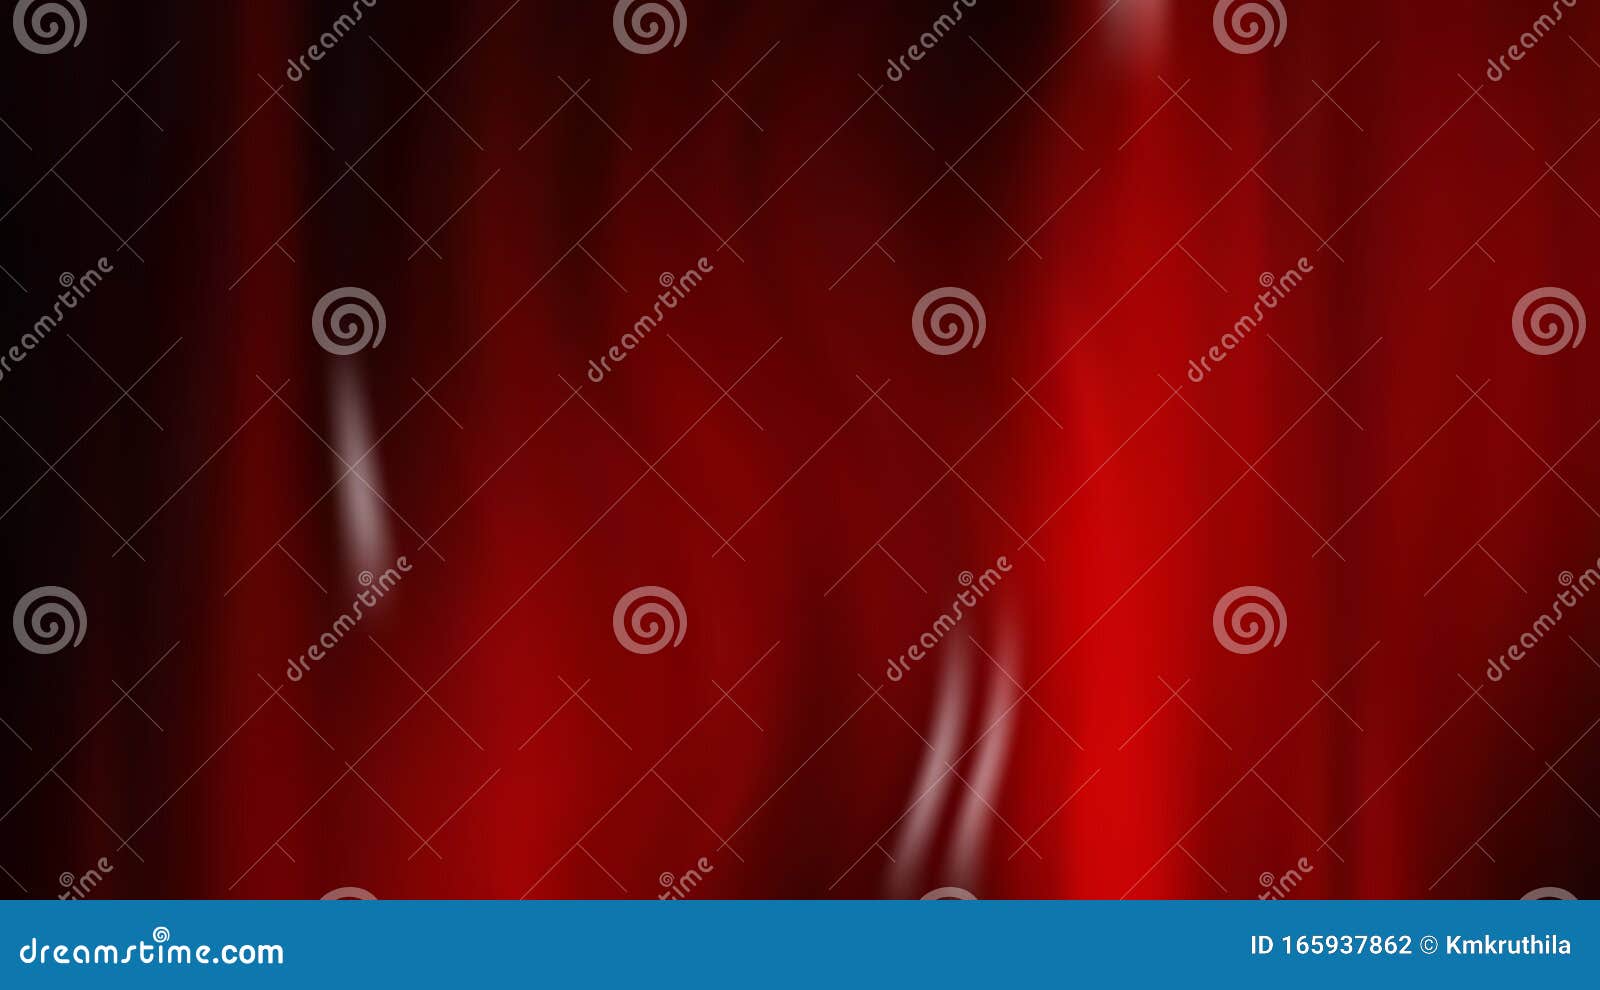 Red And Black Powerpoint Background Graphic Stock Vector Illustration Of Color Simple 165937862